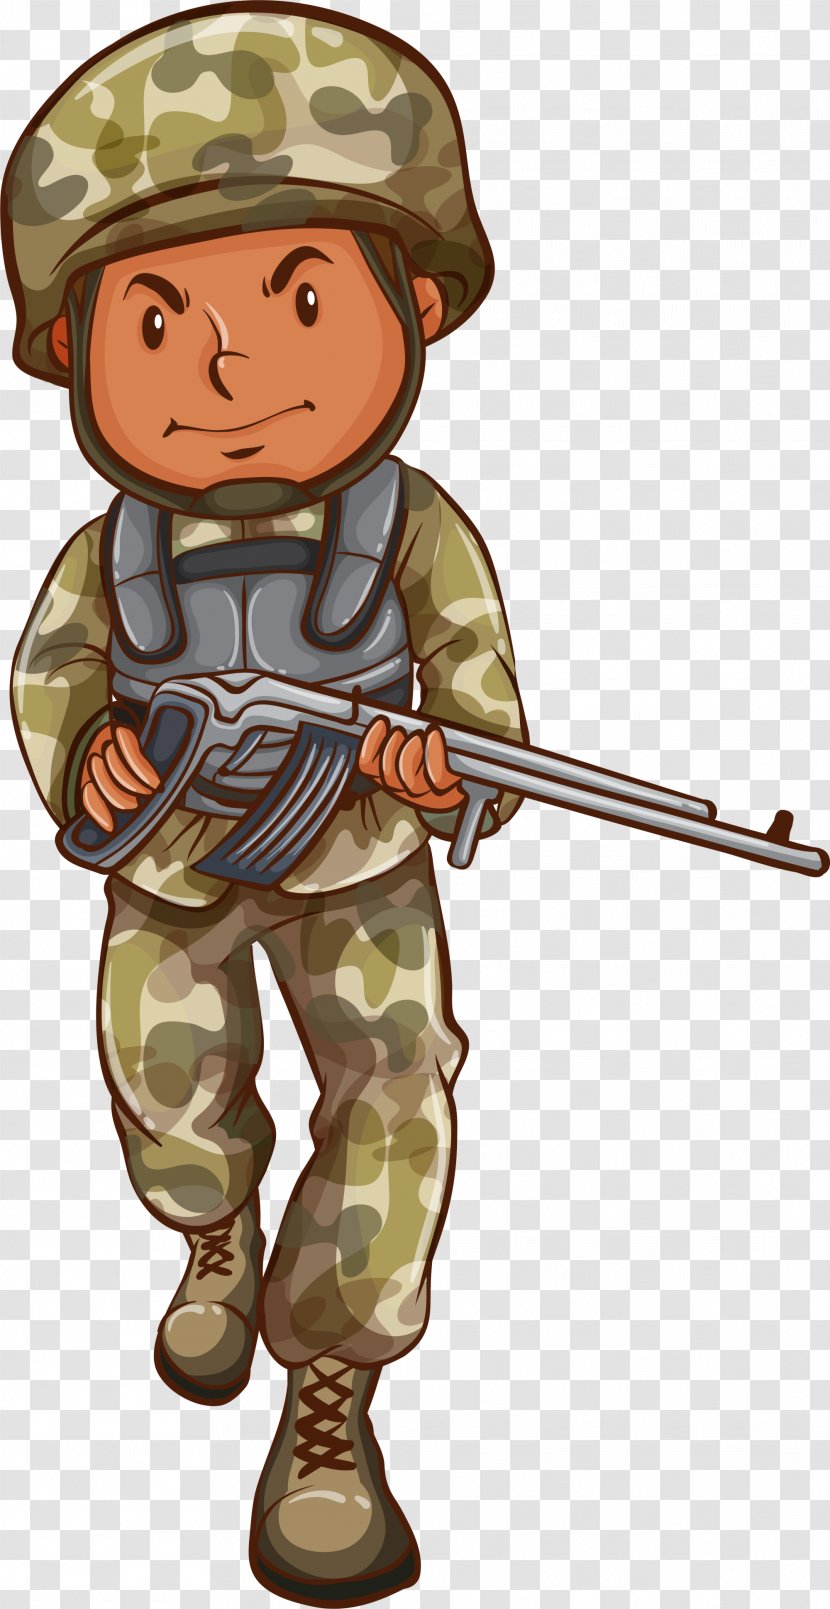 Soldier Drawing Illustration - Male - Green Cartoon Soldiers ...